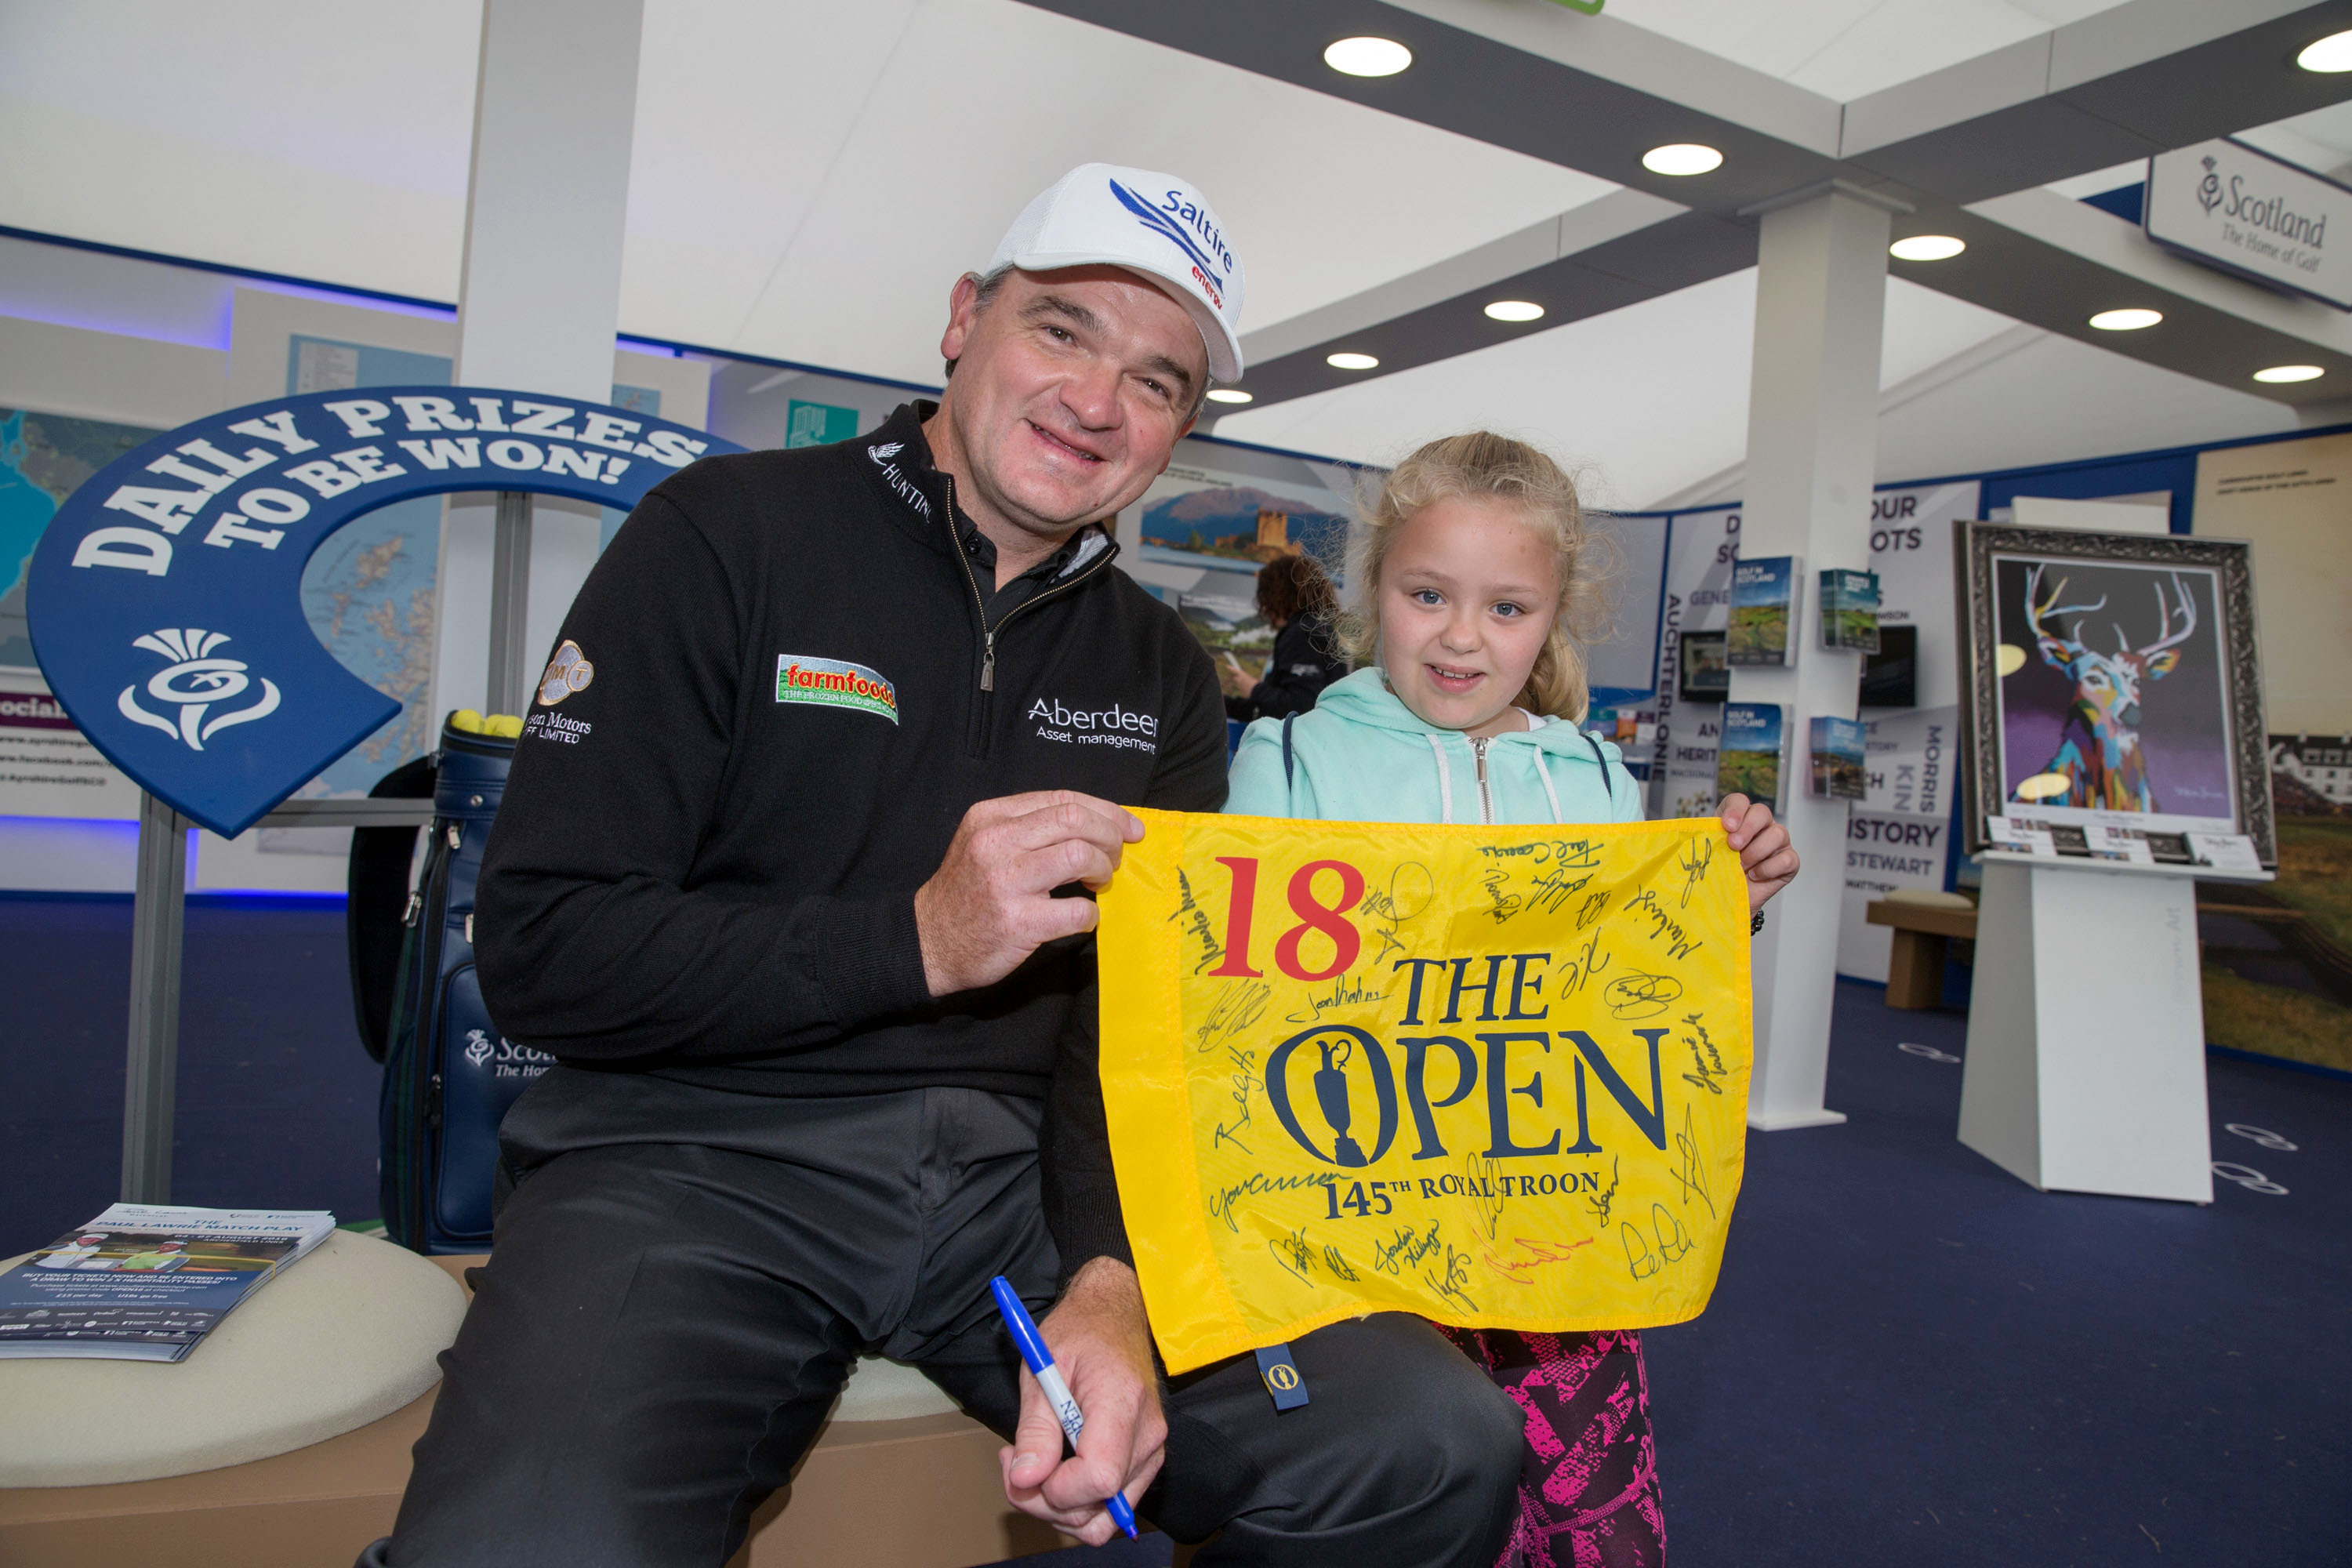 Paul Lawrie with Demi Richardson after signing her Open flag at the Scotland Home of Golf Stand.